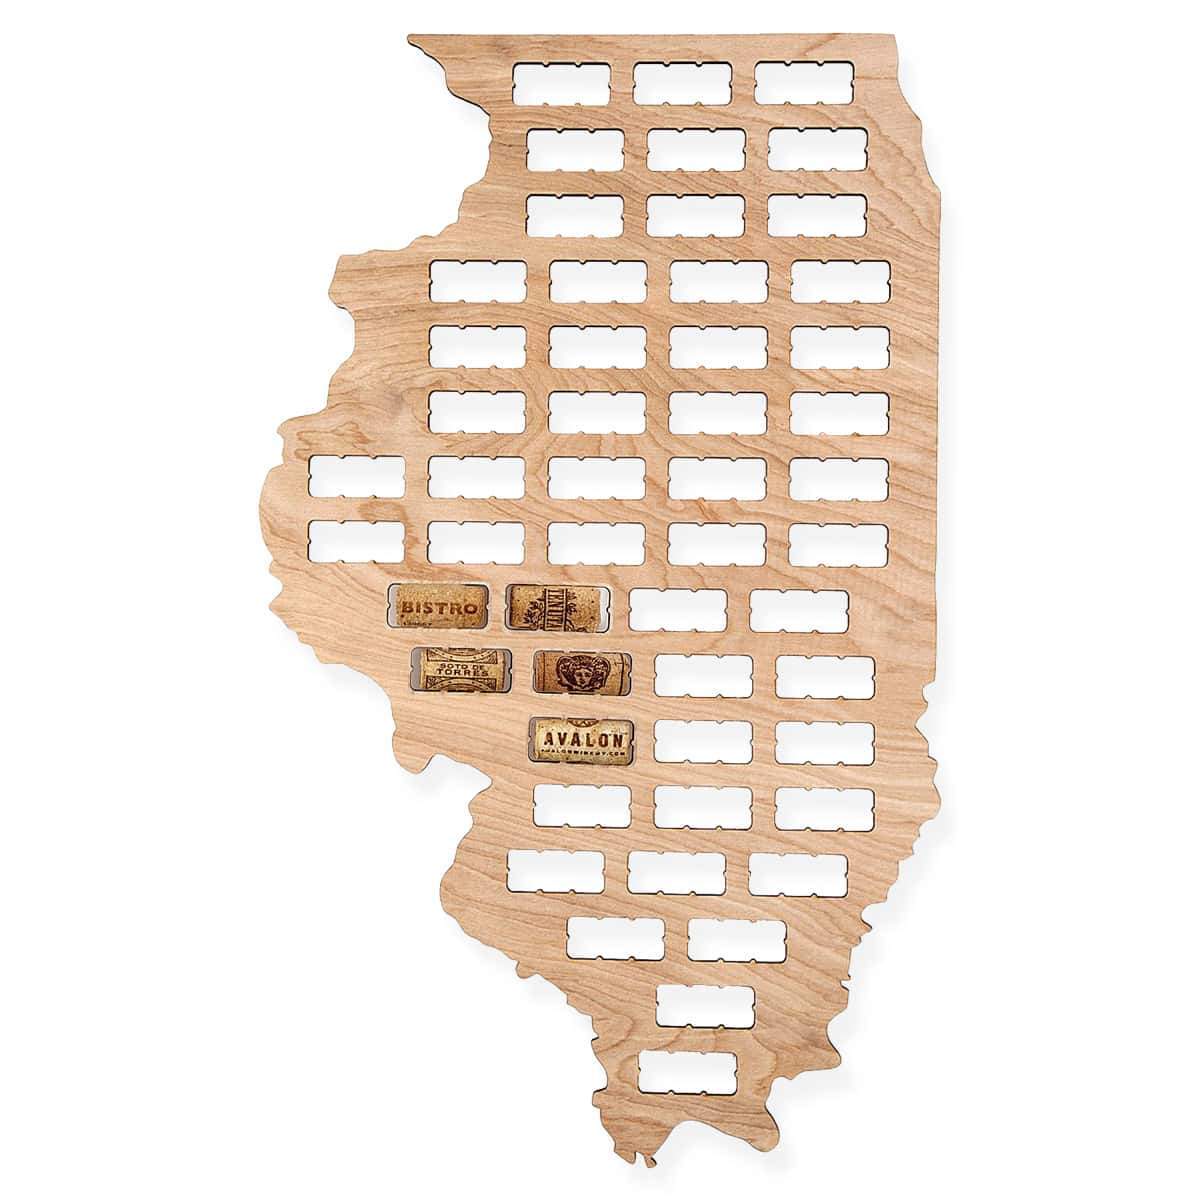 Torched Products Wine Cork Map Illinois Wine Cork Map (778968629365)